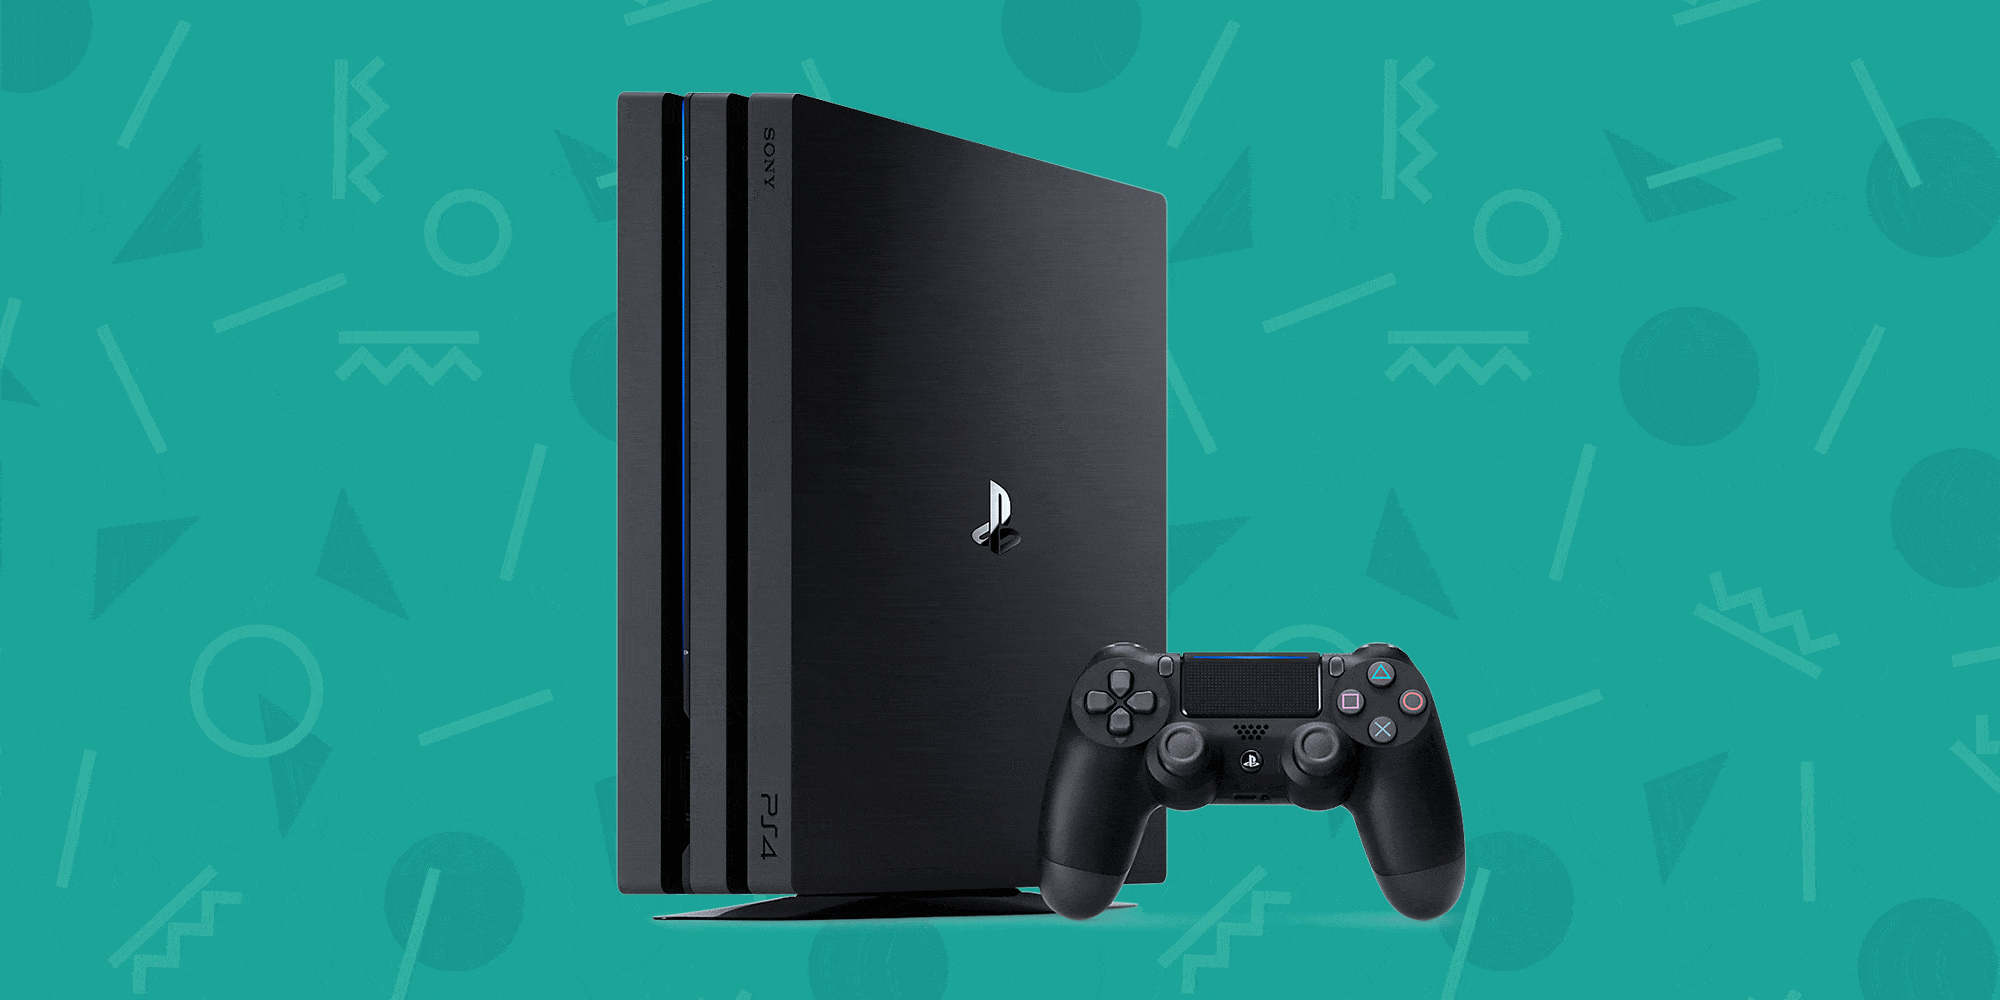 PS4 Pro Review: Is Playstation 4 Pro Worth the Price?